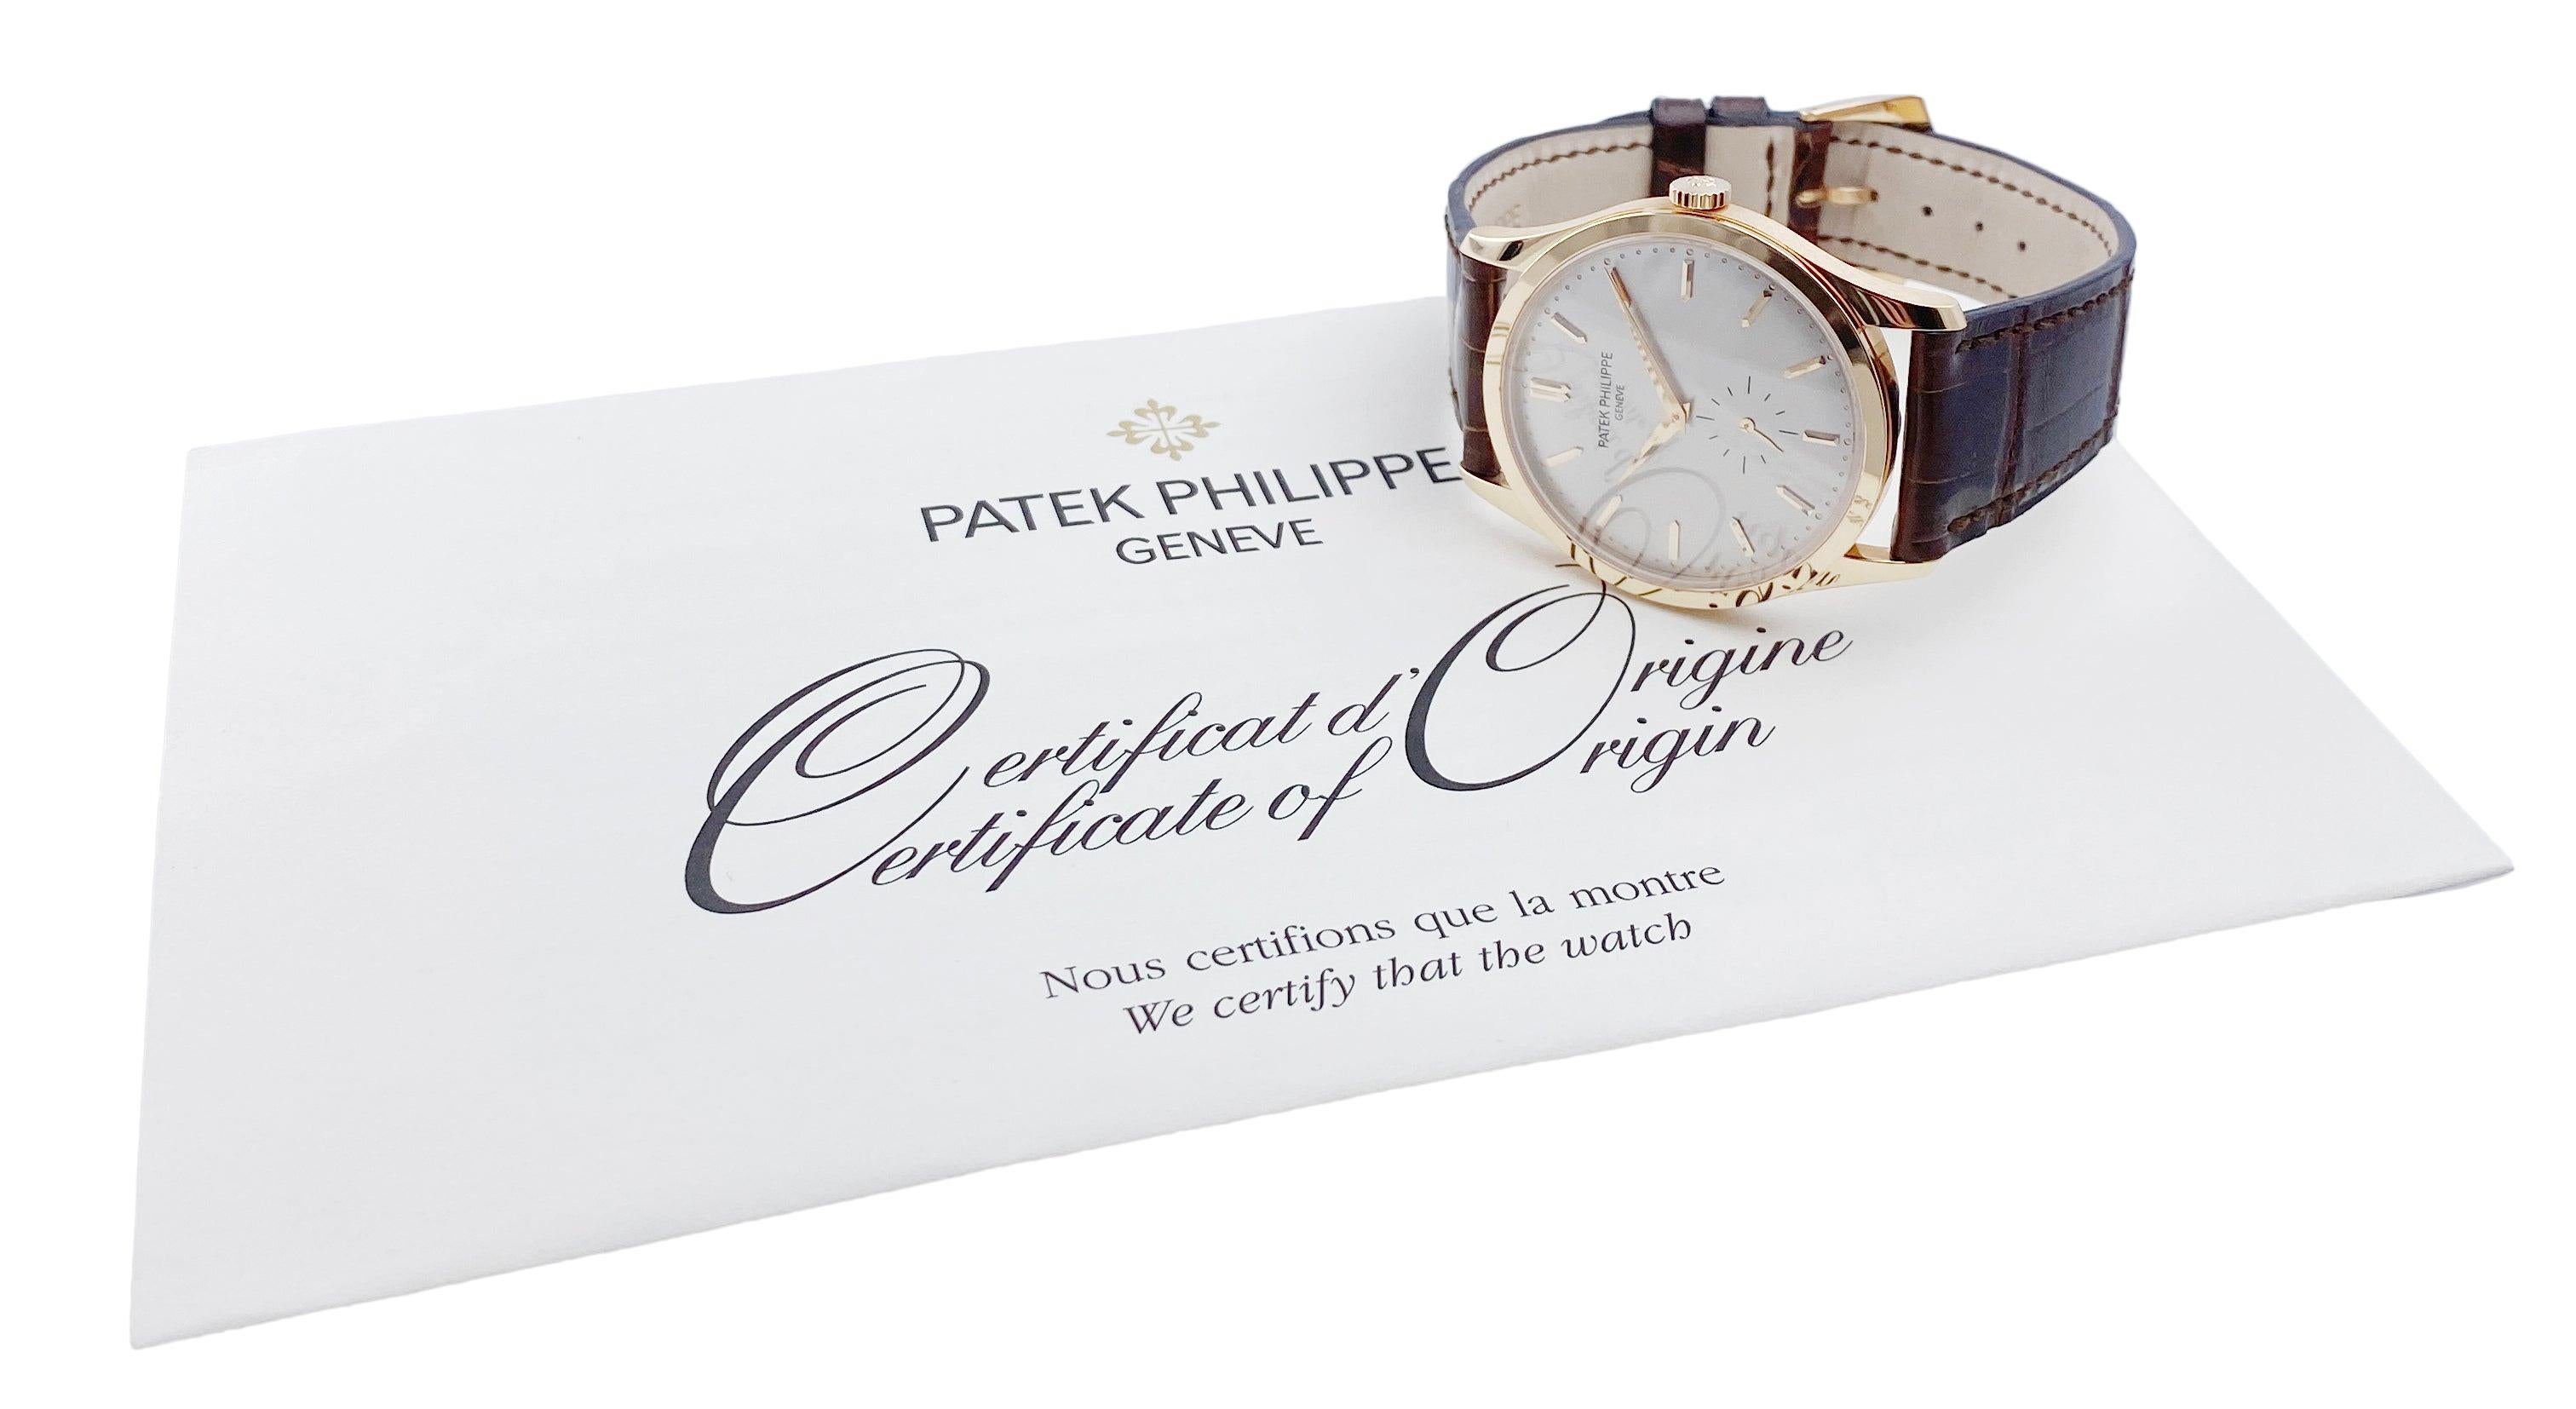 Patek Philippe Calatrava 5196R-001 Mens Watch. 37mm 18K rose gold case with 18K rose gold smoothed bezel. Silver dial with rose gold hands and rose gold index hour marker. Small second sub-dial display between 5 & 7 o'clock position. Brown leather